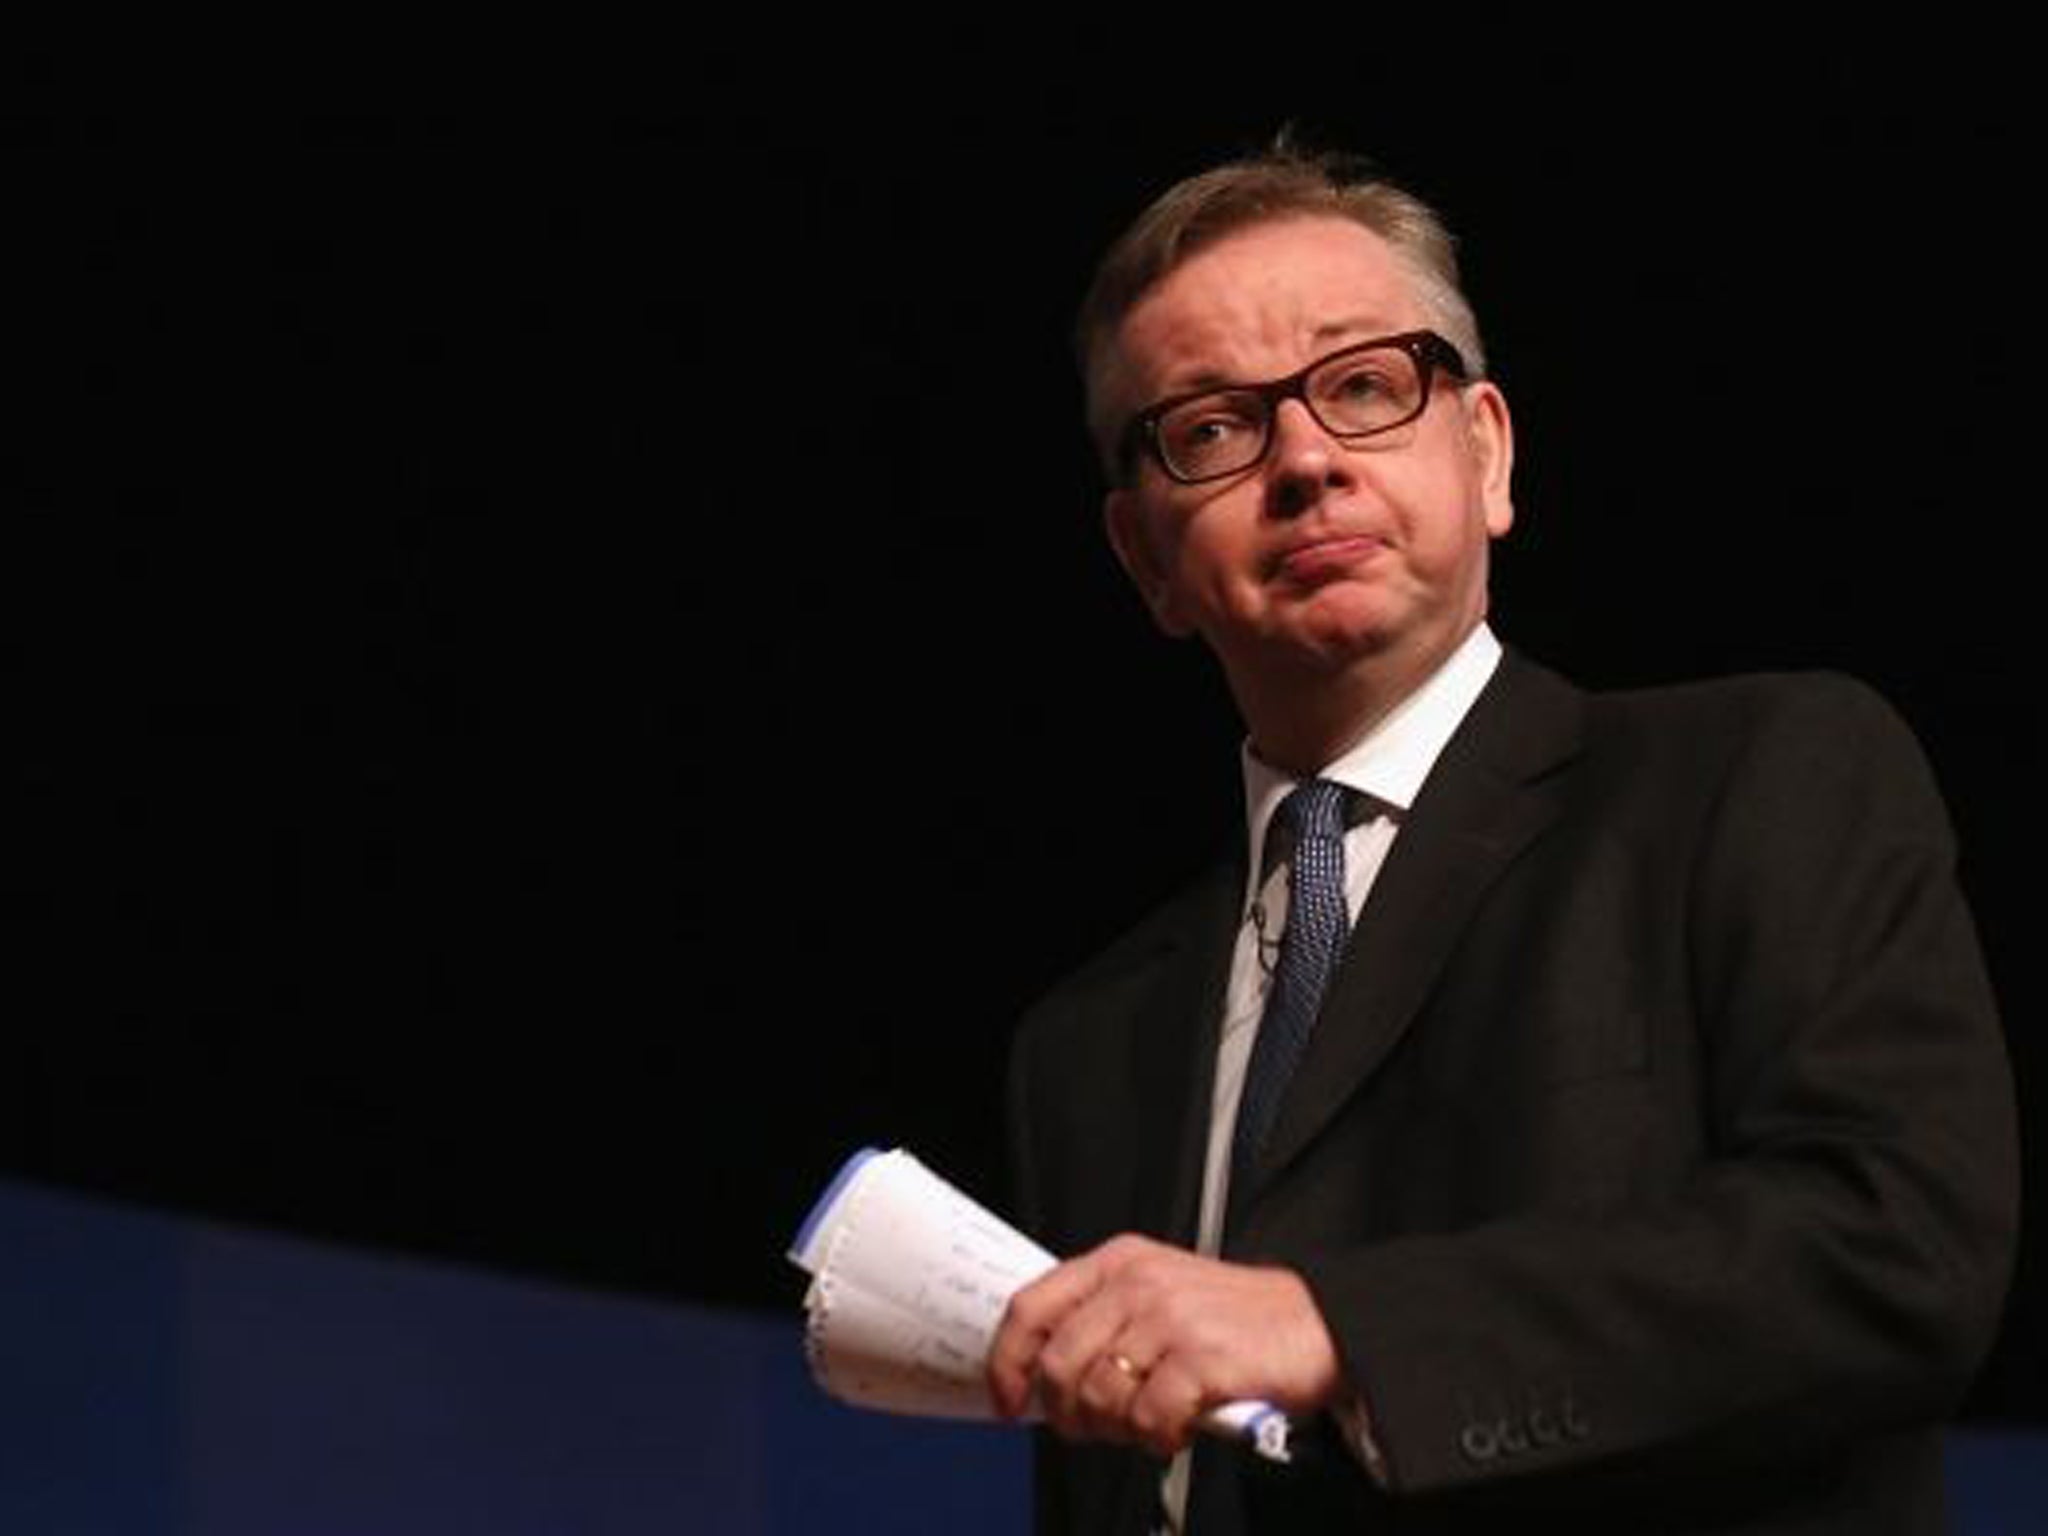 More than 2,000 teachers have put their names to a petition condemning Michael Gove's proposed national curriculum reforms